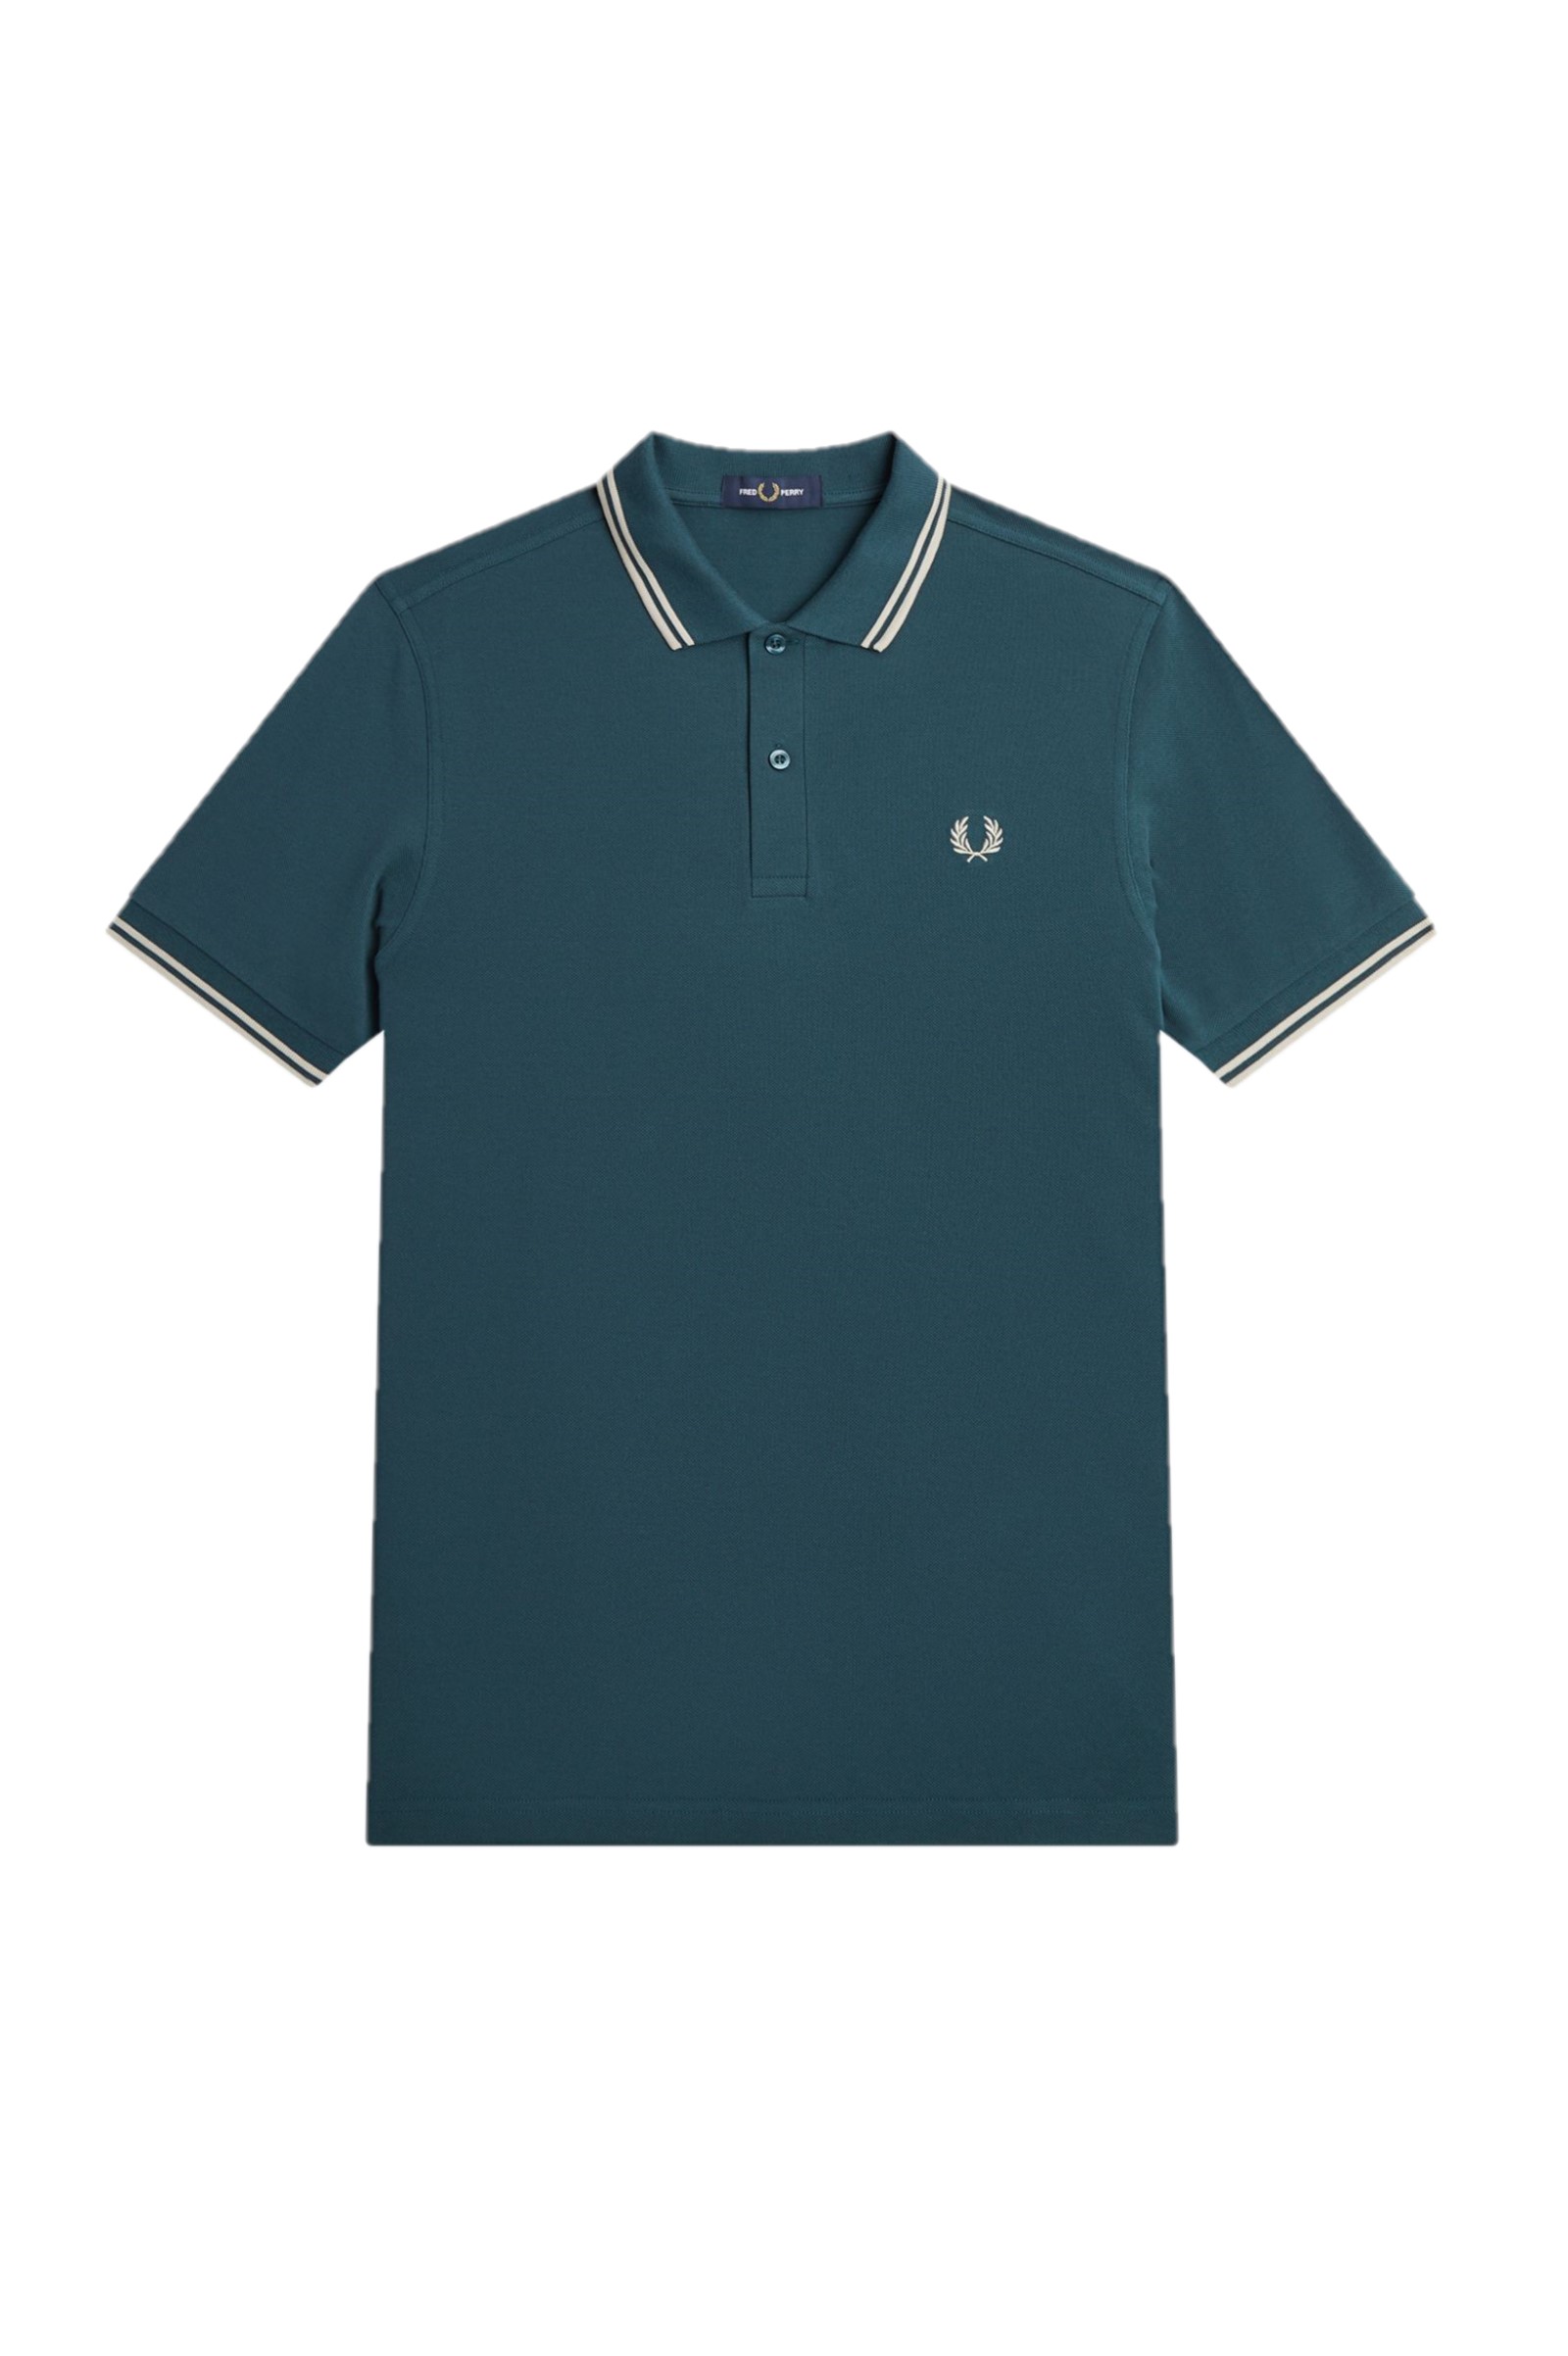 Fred Perry Slim Fit Twin Tipped Polo Petrol Blue / Light Oyster / Light Oyster